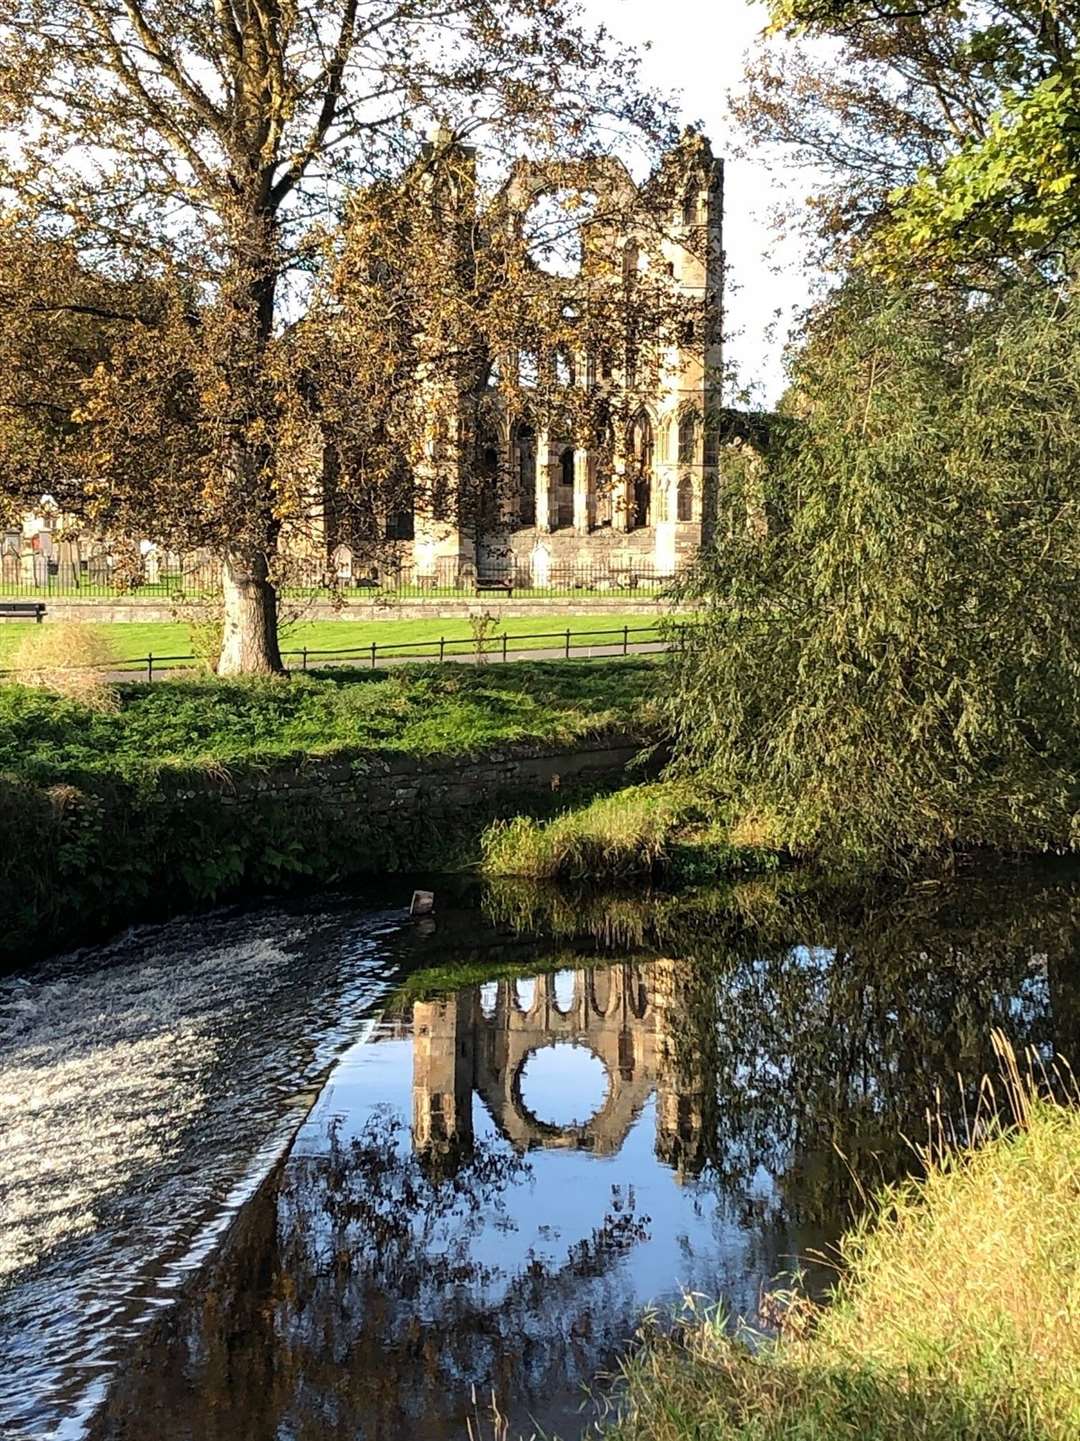 Debbie Knowles took this award winning photograph of Elgin Cathedral with her smartphone.